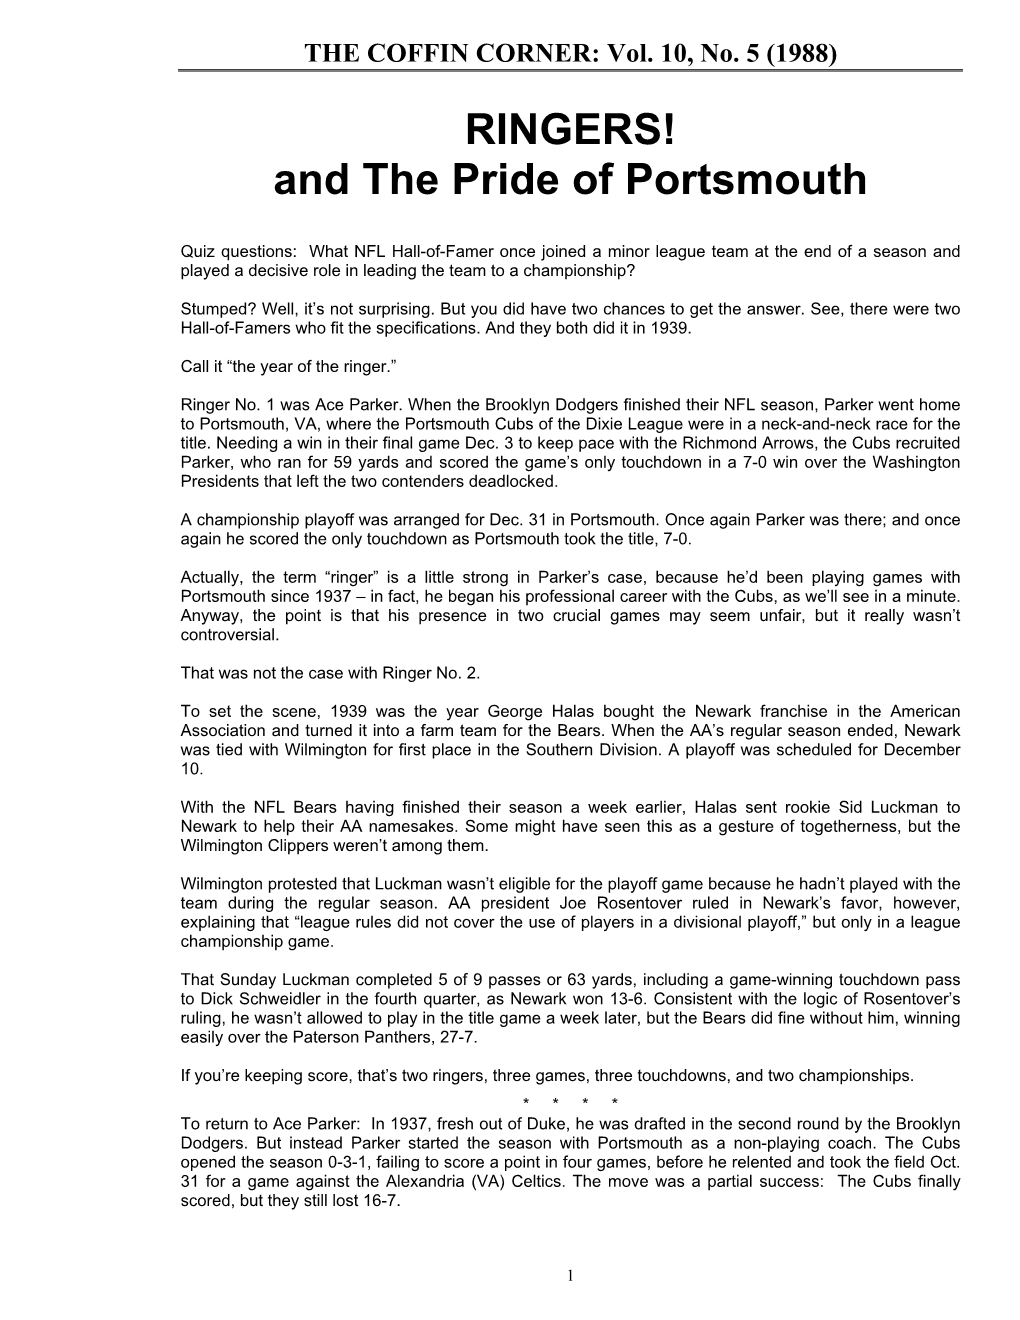 RINGERS! and the Pride of Portsmouth